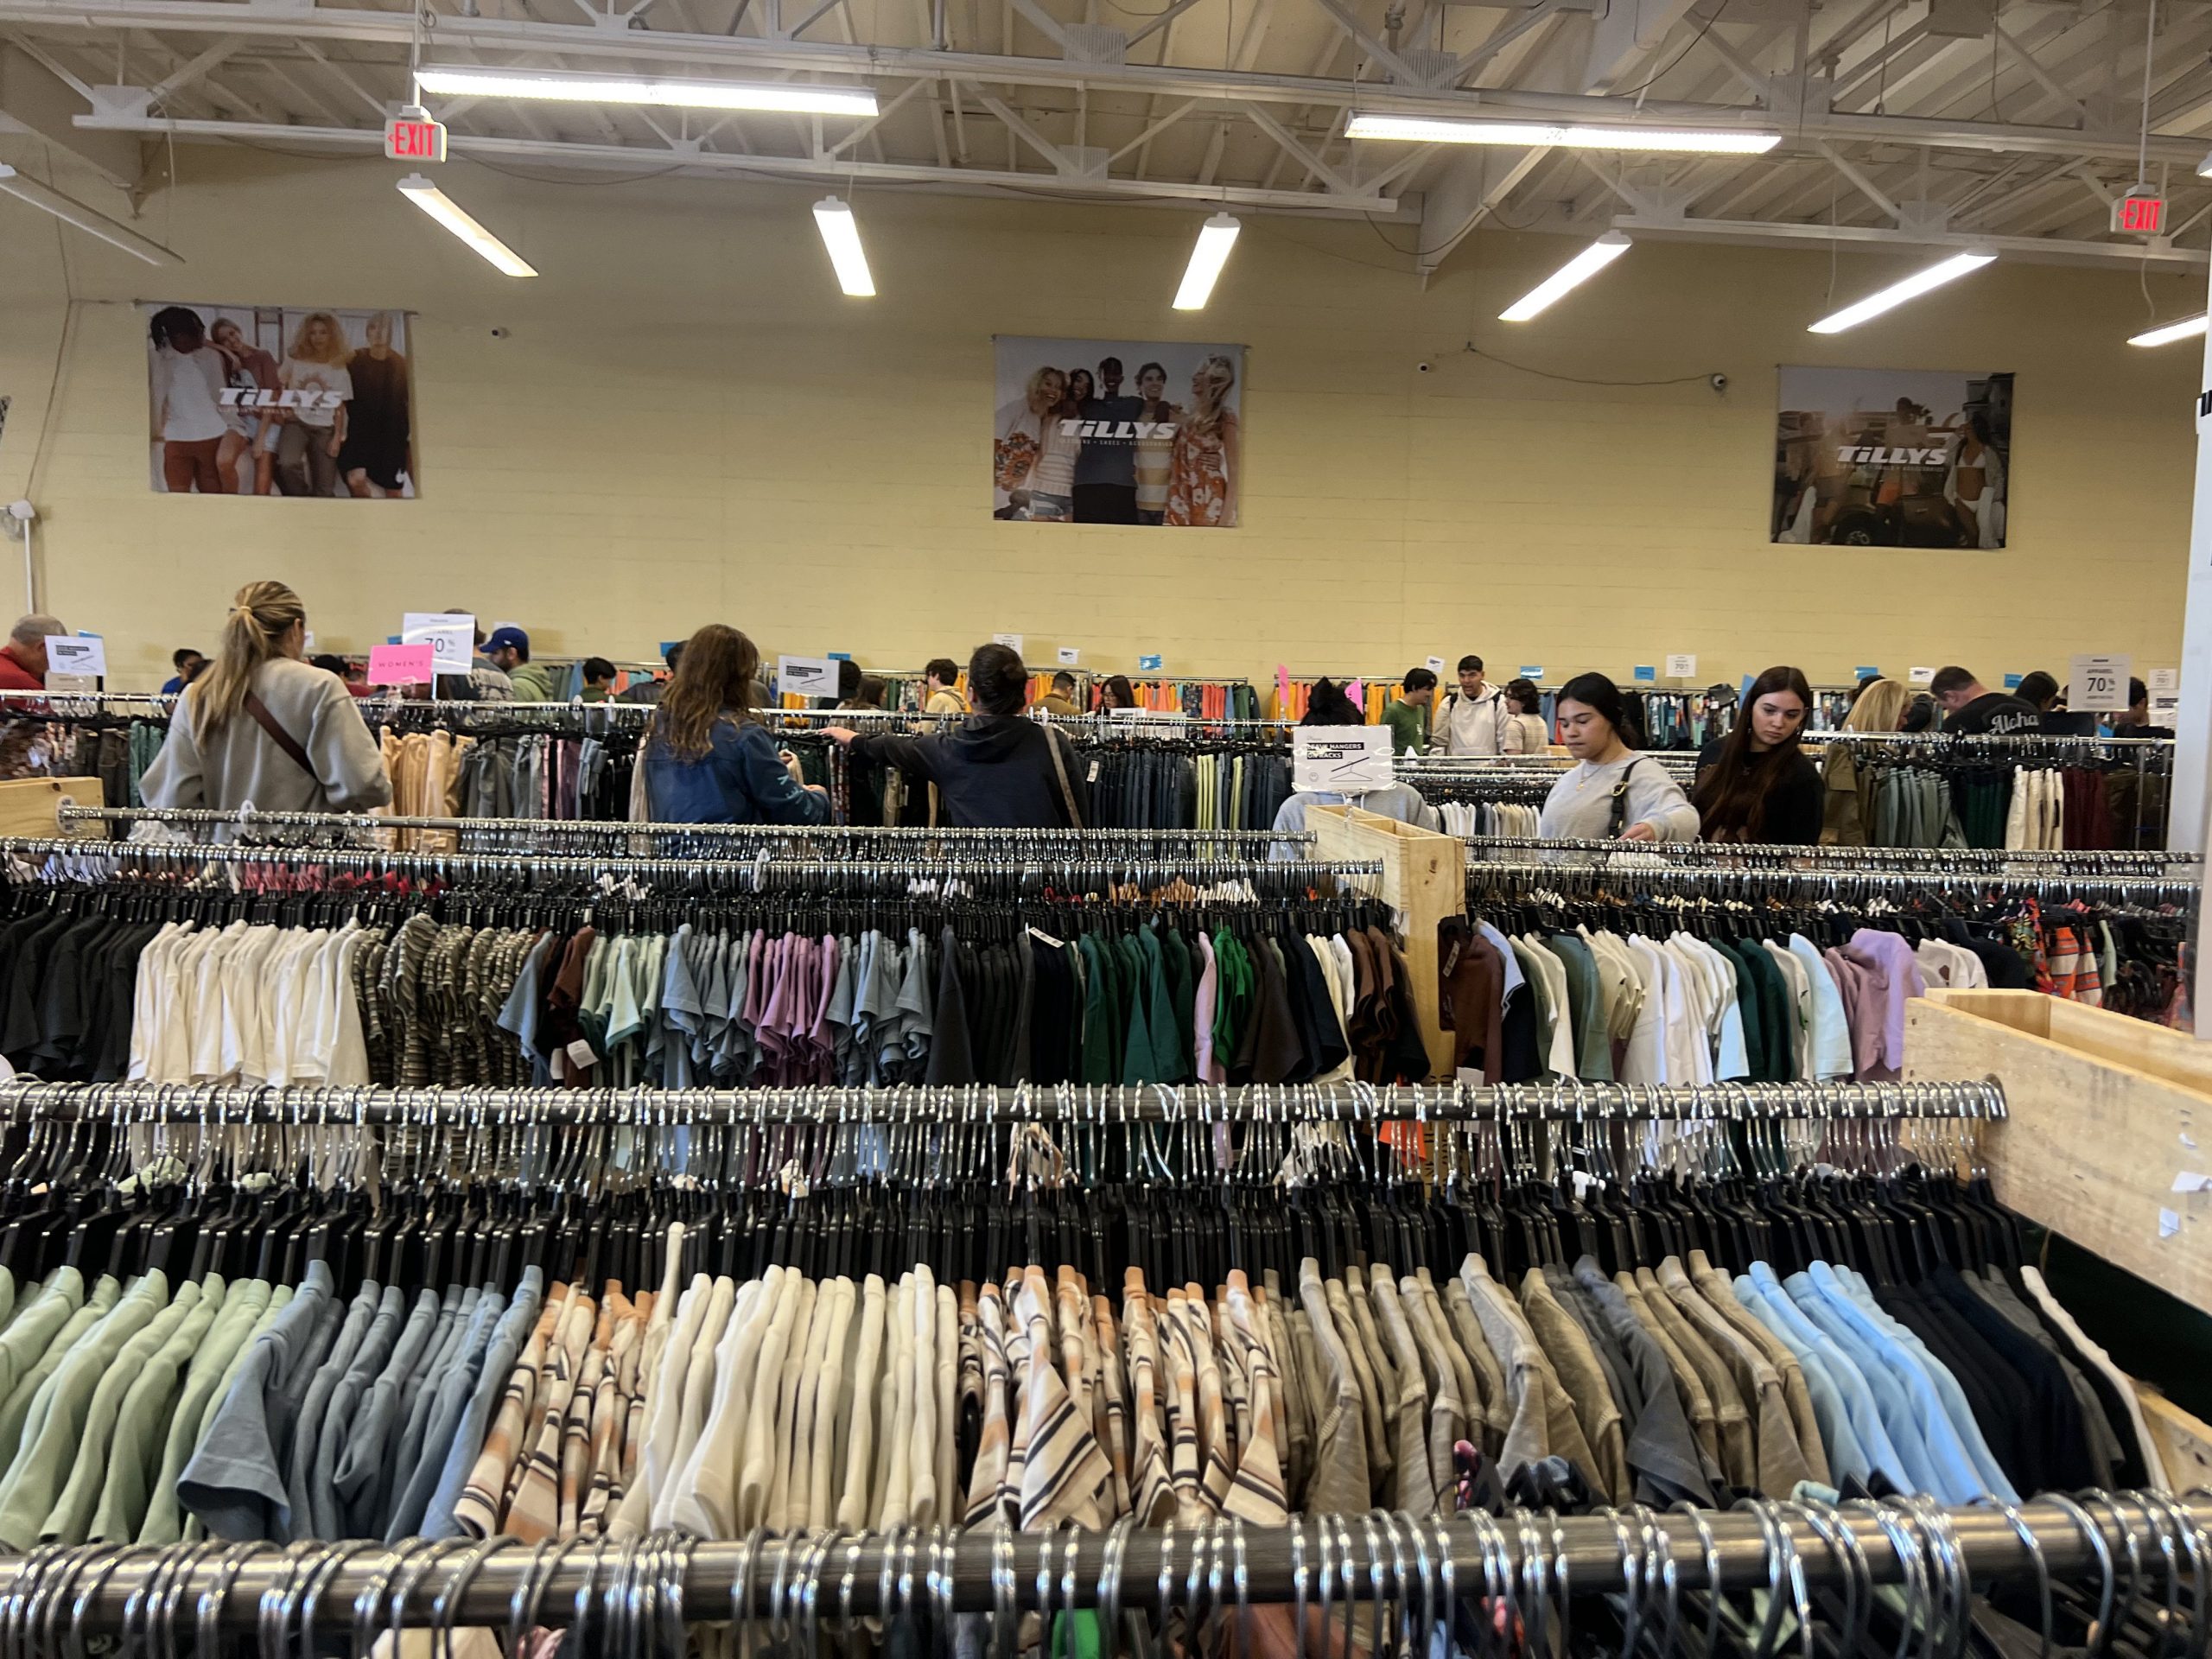 Sample sales are key to being bougie on a budget in L.A. [Video]